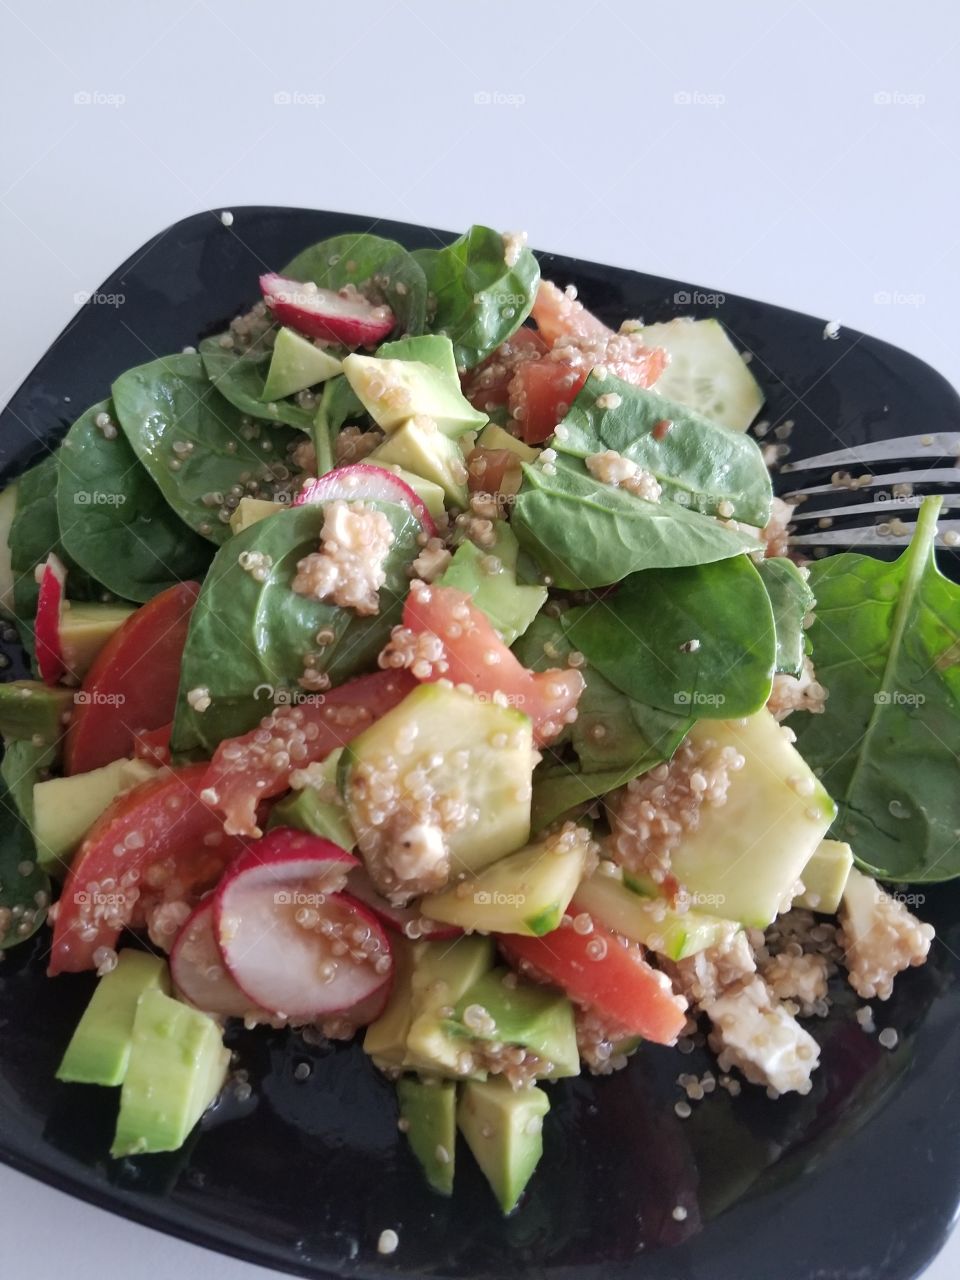 Salad: radish, tomatoe, quinoa, spinach leaves, cucumber, feta cheese and avocado with a homemade balsamic vinagrette. Dressing: 2:1 balsamic vinegar : olive oil, salt and pepper to tast and blended together with a spoonful of honey.